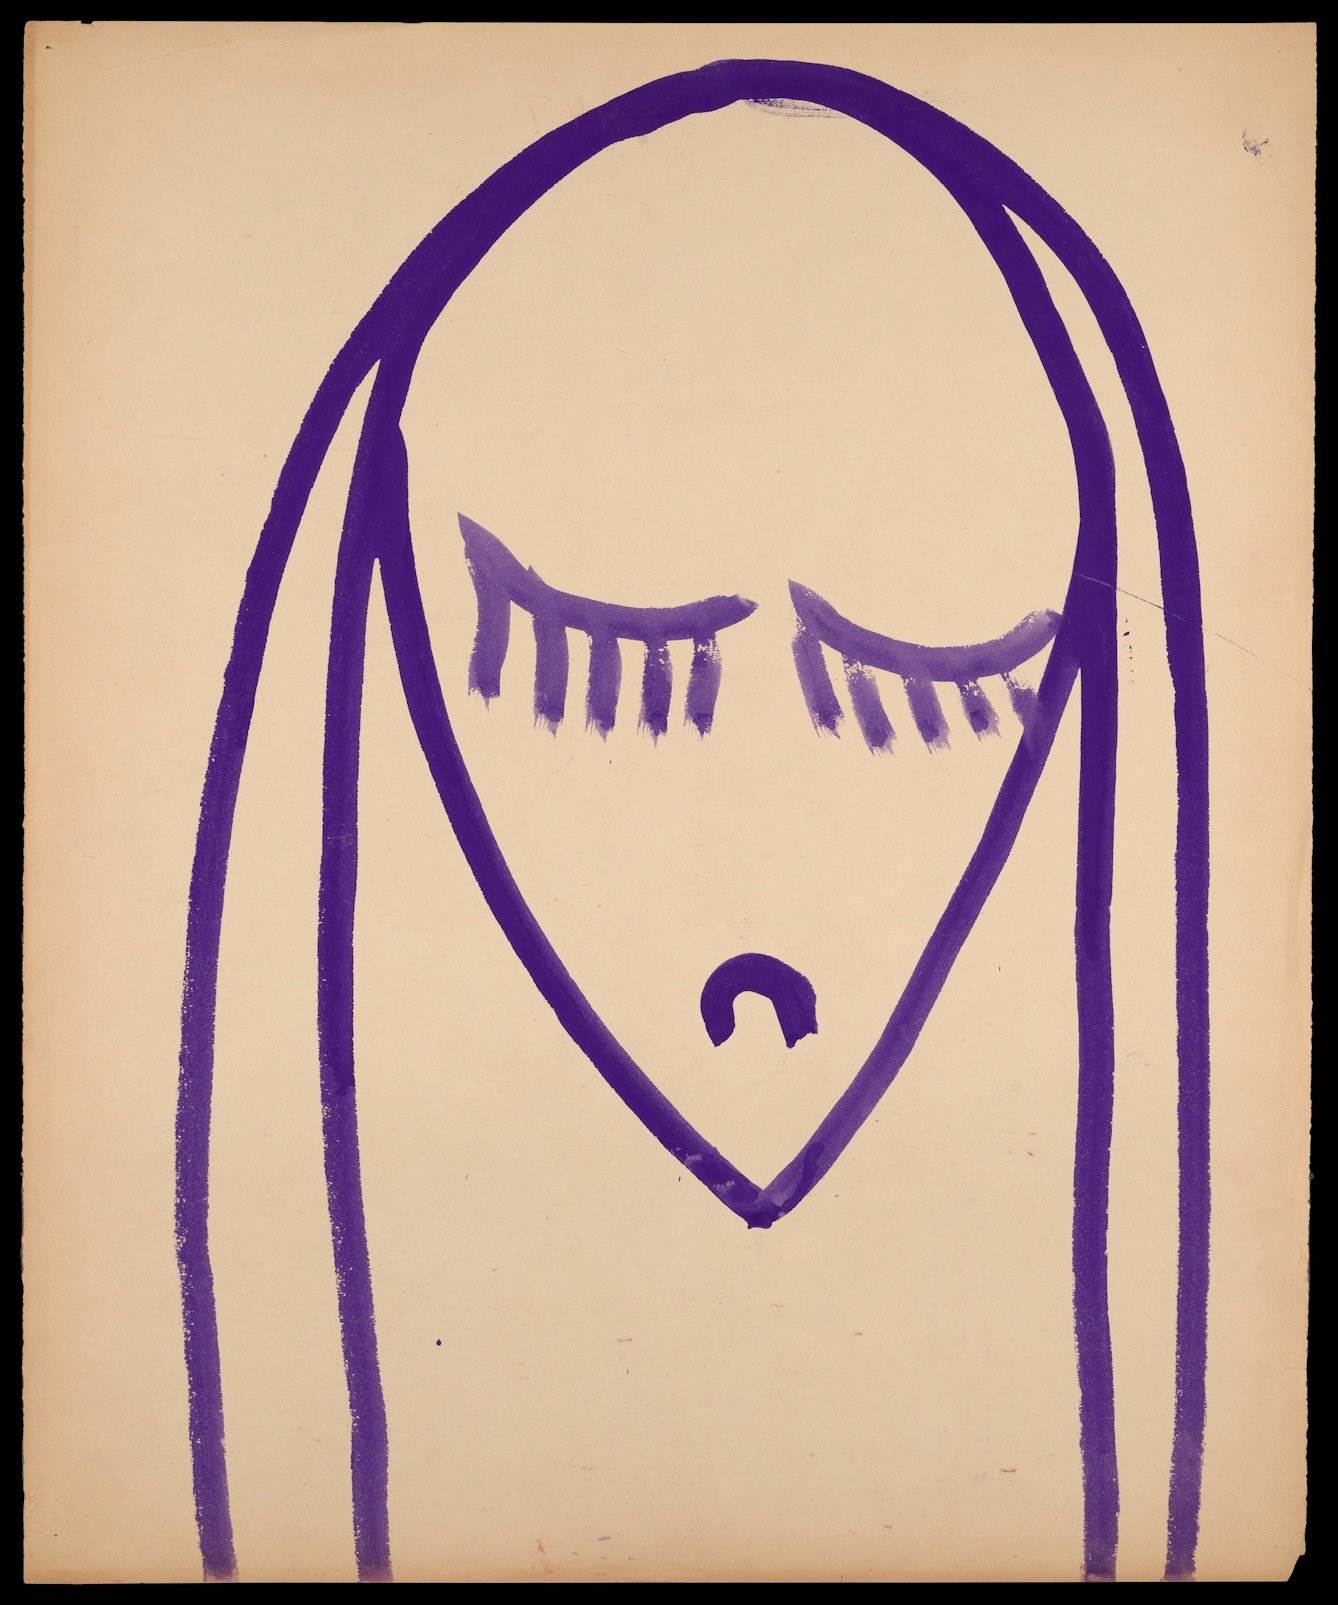 Photograph of a watercolour artwork showing an abstract outline drawing in purple. The image seems to show a young woman’s face and head, her eyes closed or lowered and her mouth turned down, creating a sad expression.